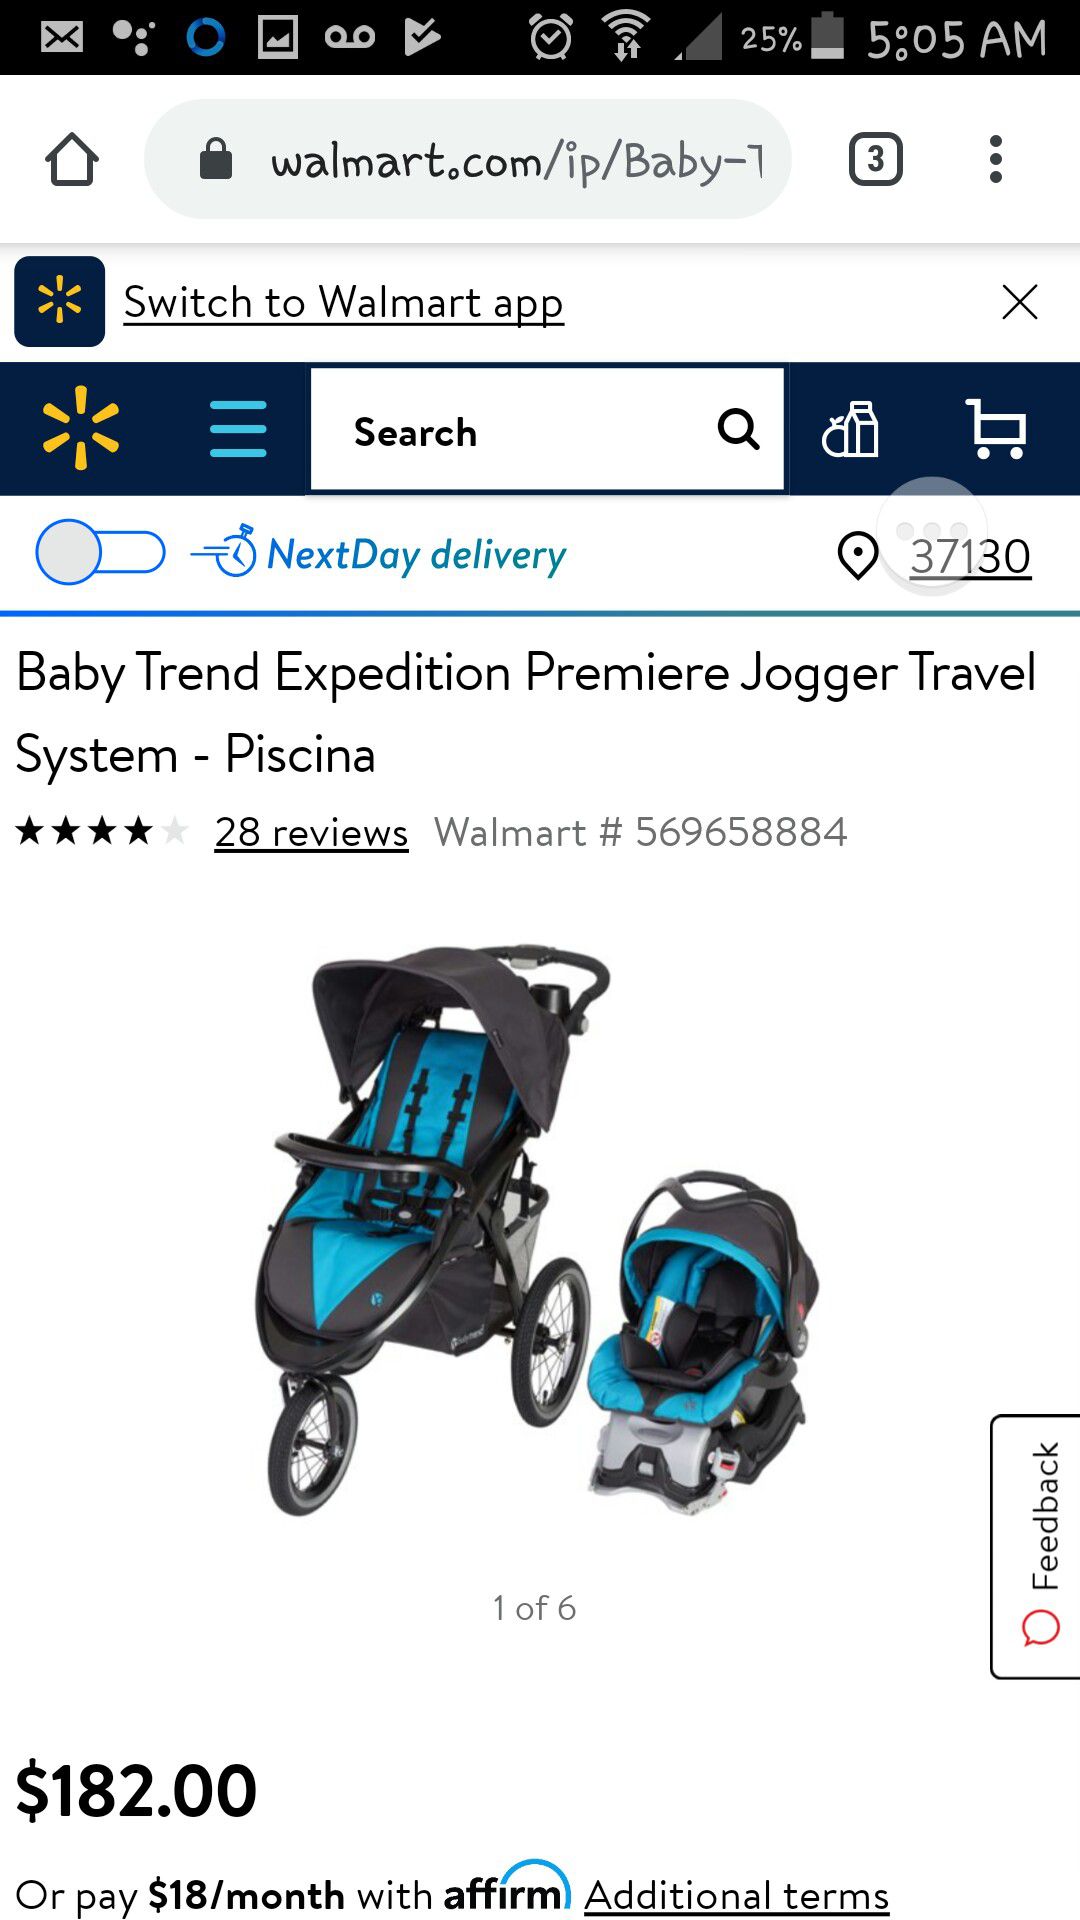 Brand new Baby Trend Jogger car seat and stroller set